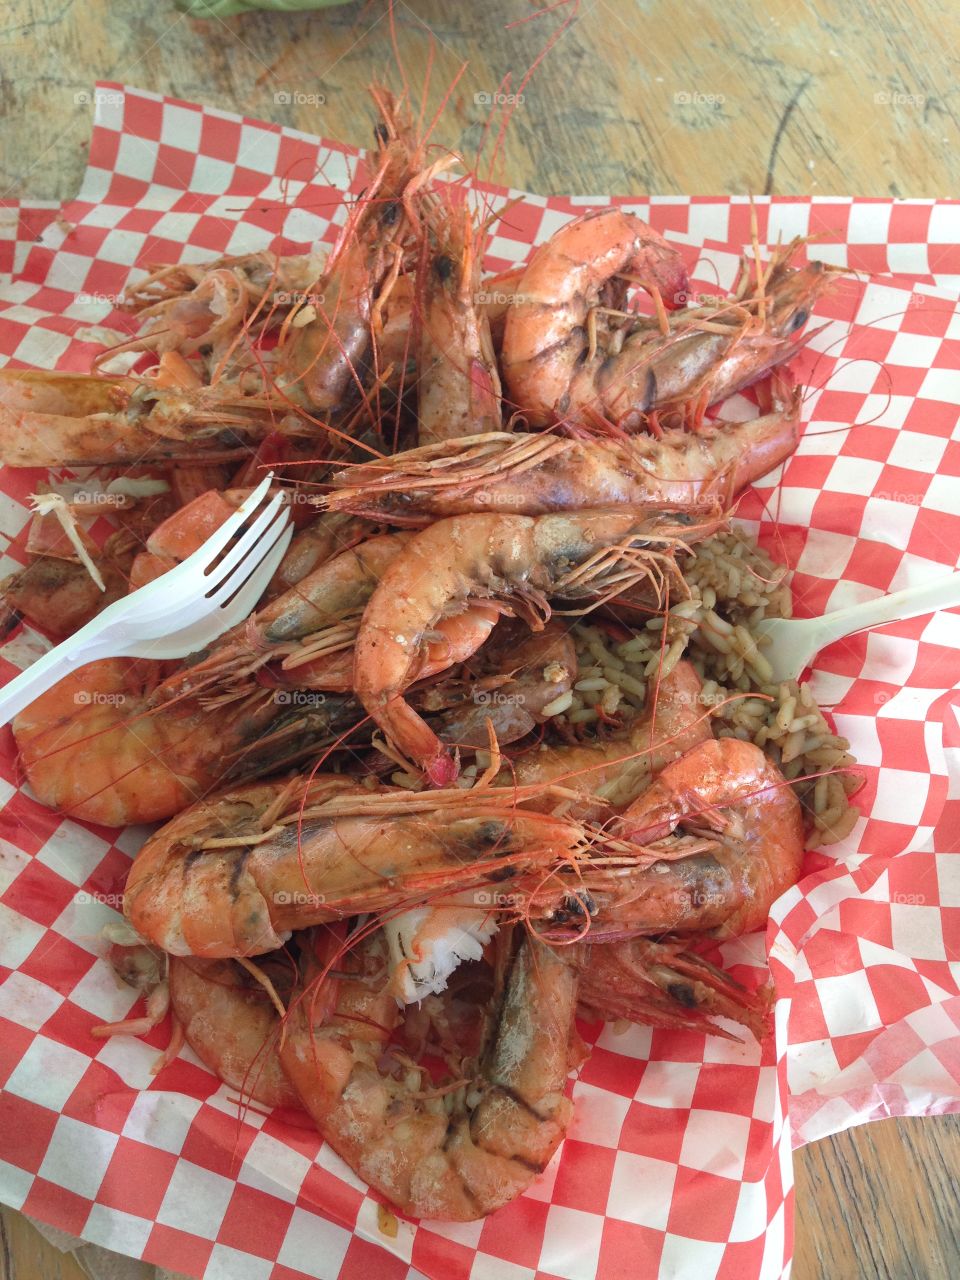 Shrimp delight. Little River shrimp fest 2015 a huge event with fresh seafood and vendors.  A great event for family and  vacationers  